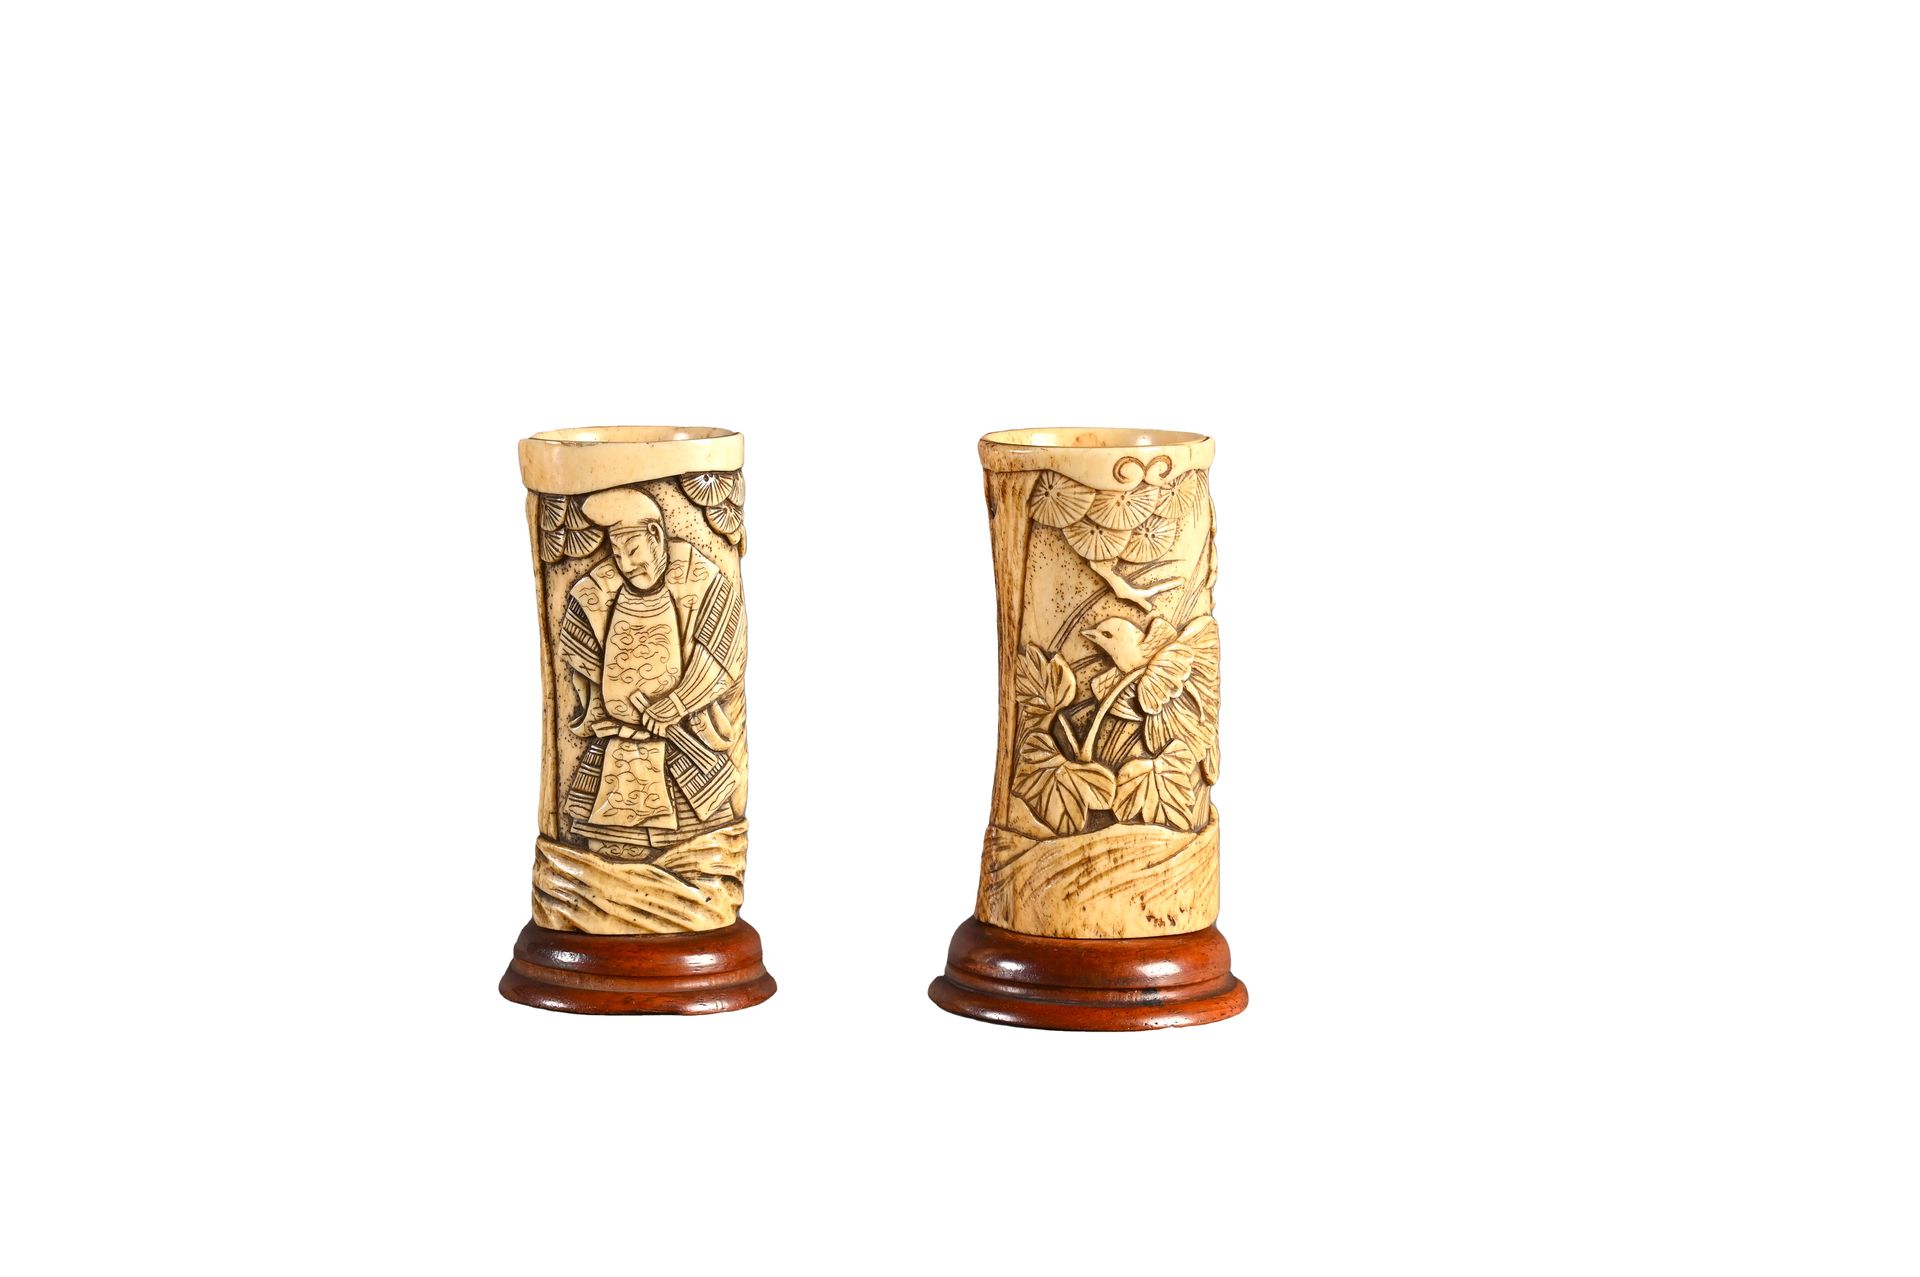 JAPON, époque Meiji Two small brush pots in deer wood on a base

One is decorate&hellip;